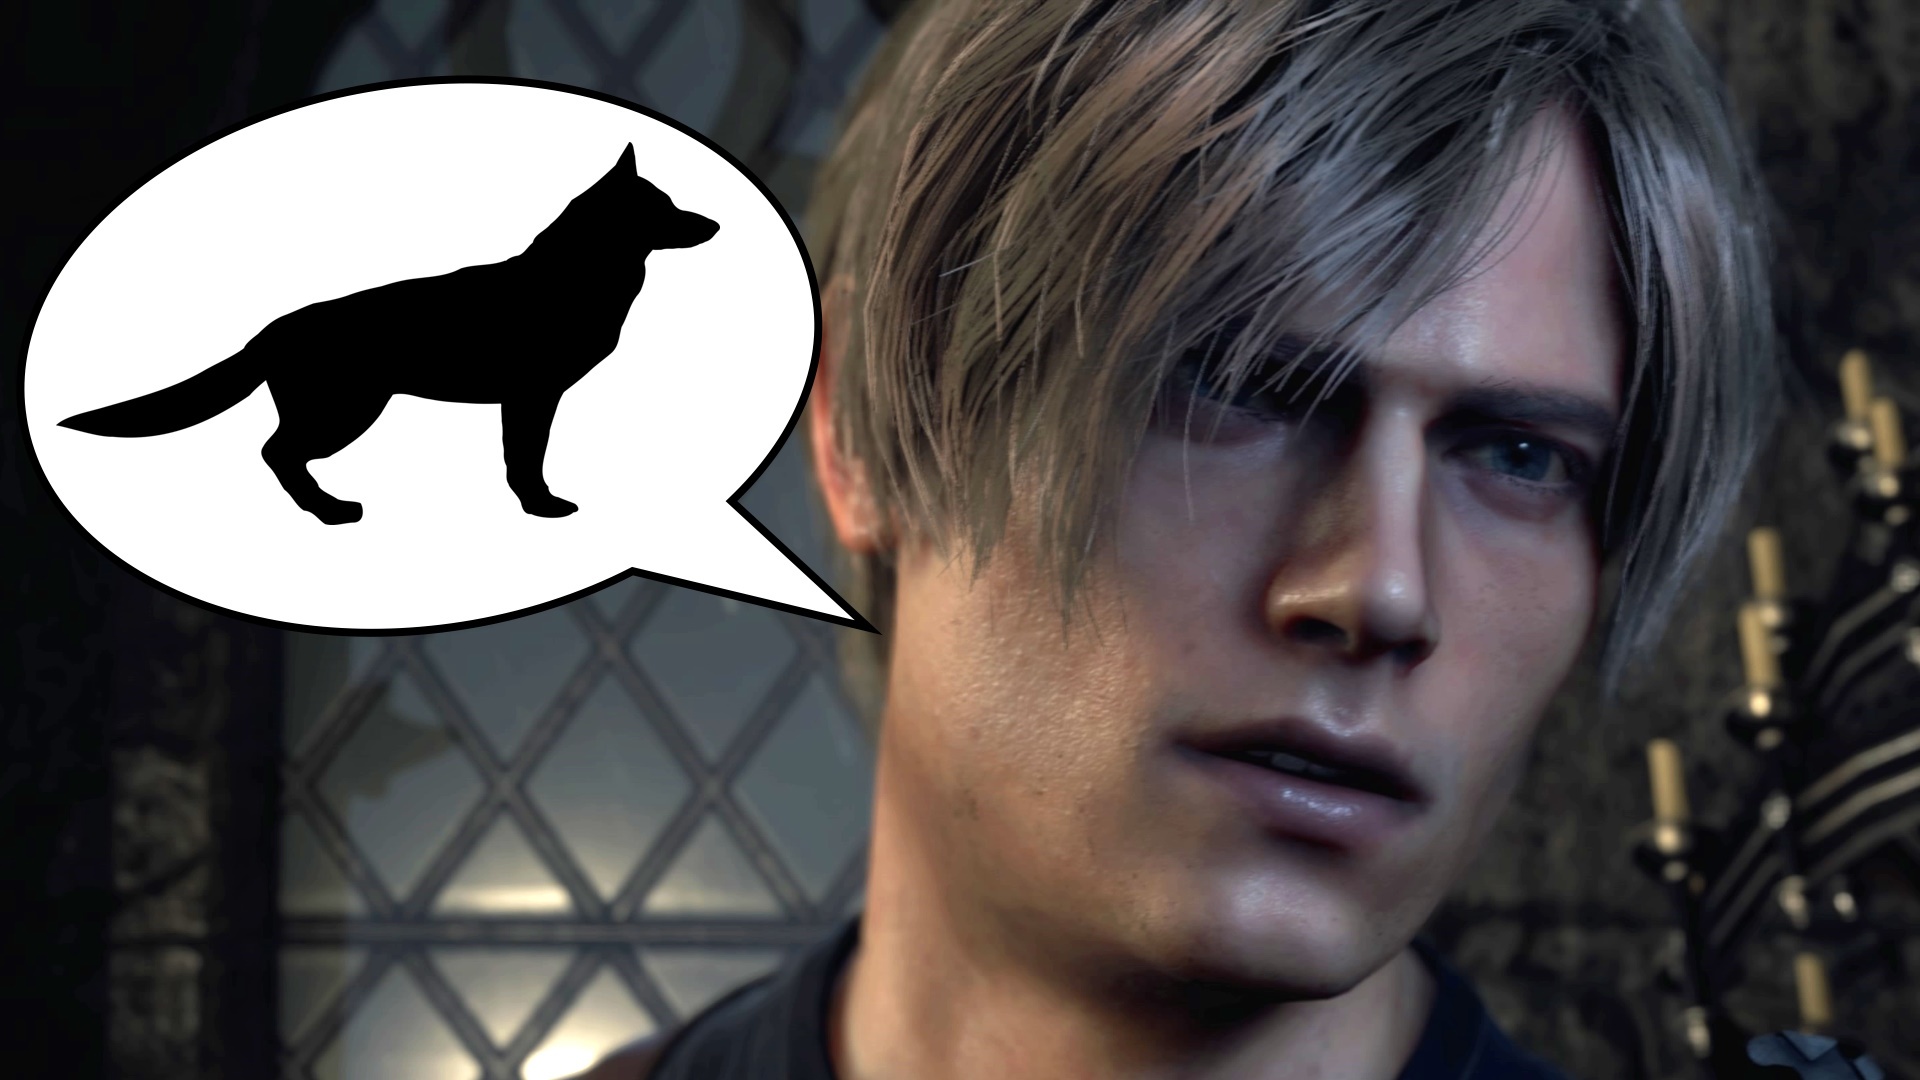 Now we know what happened to the cute dog in the remake